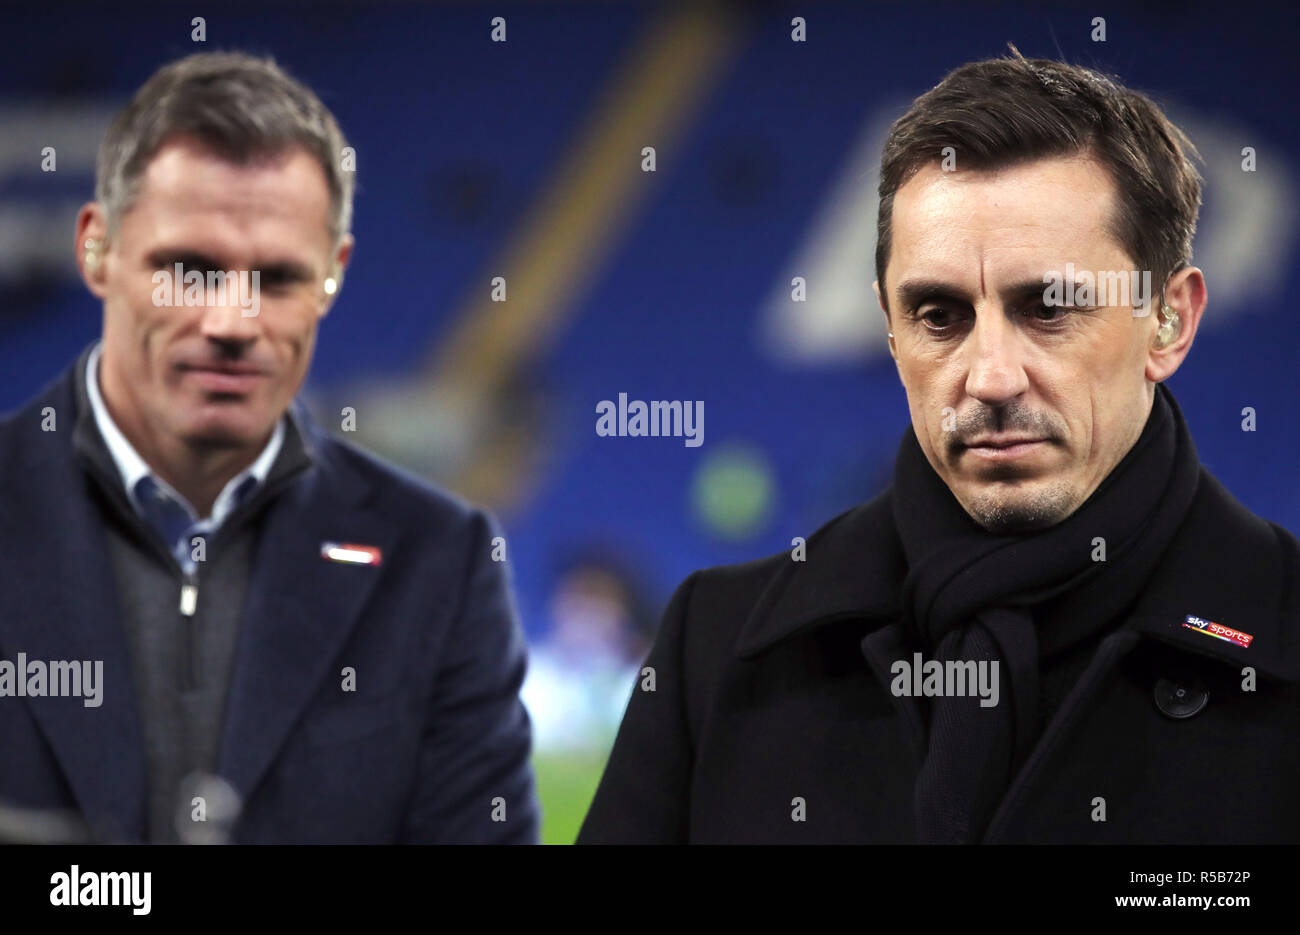 Sky Sports pundits Jamie Carragher (left) and Gary Neville during the Premier League match at Cardiff City Stadium. PRESS ASSOCIATION Photo